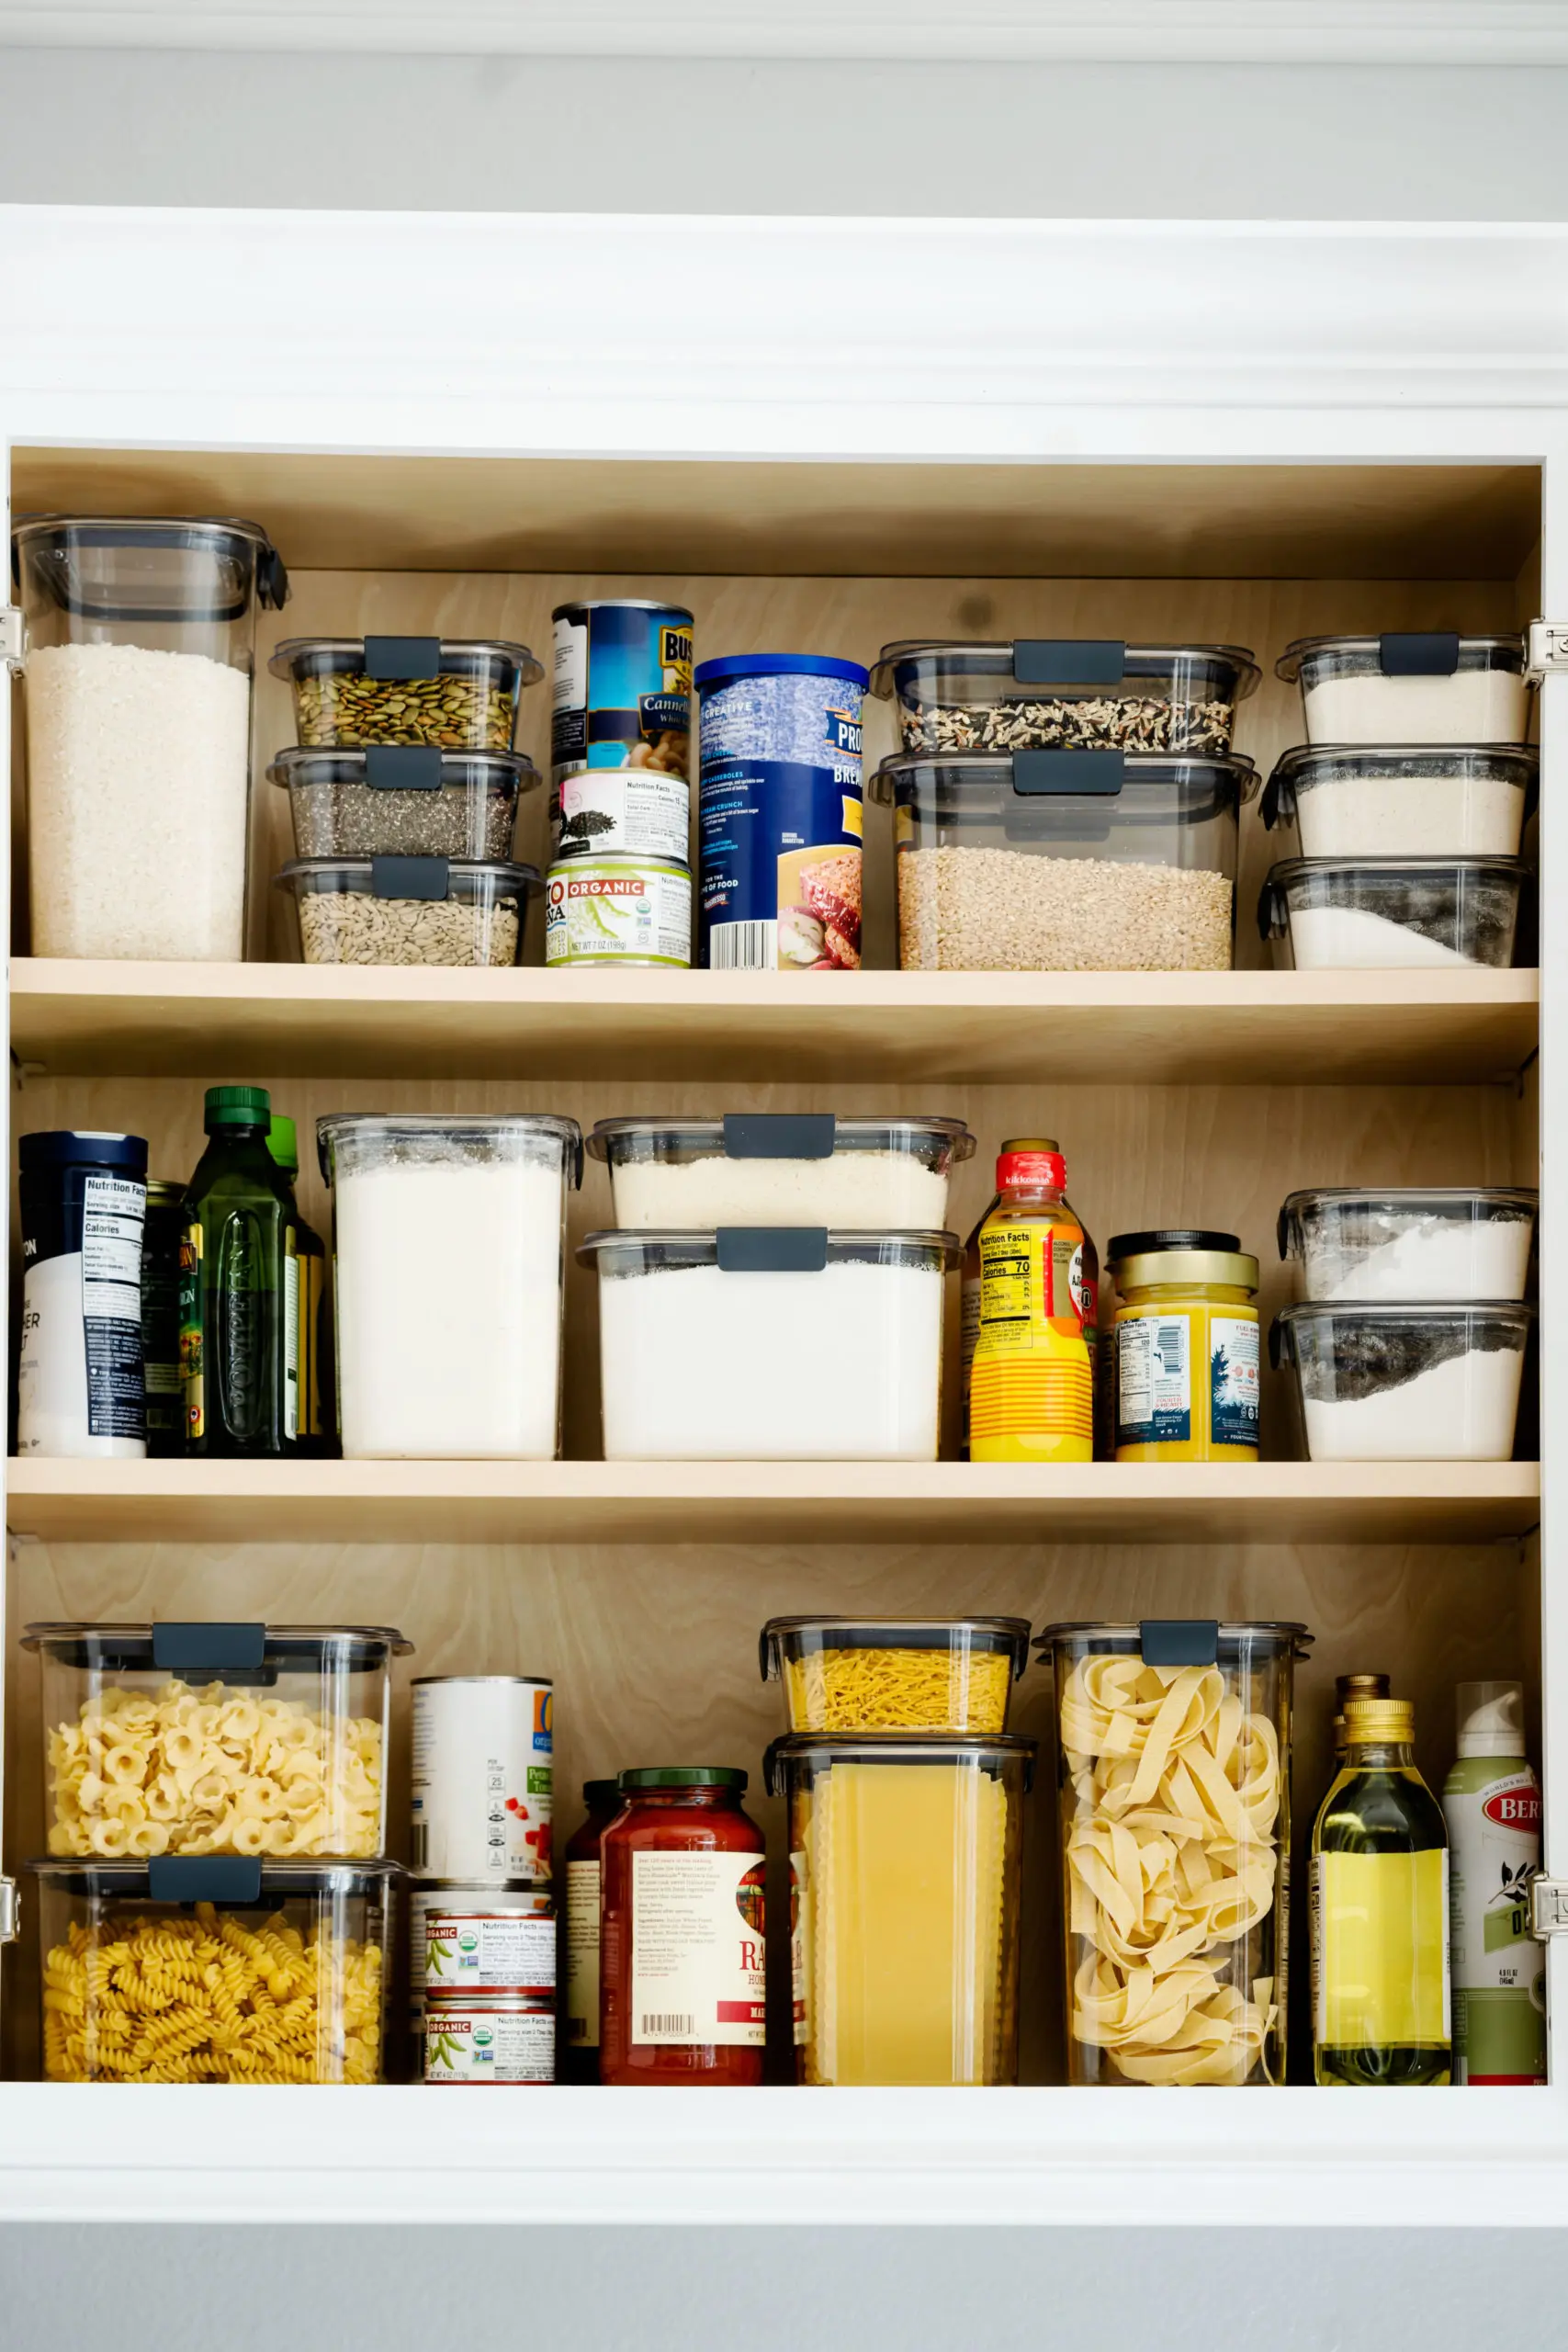 Get #routineready with the @rubbermaidbrand Brilliance Pantry collecti